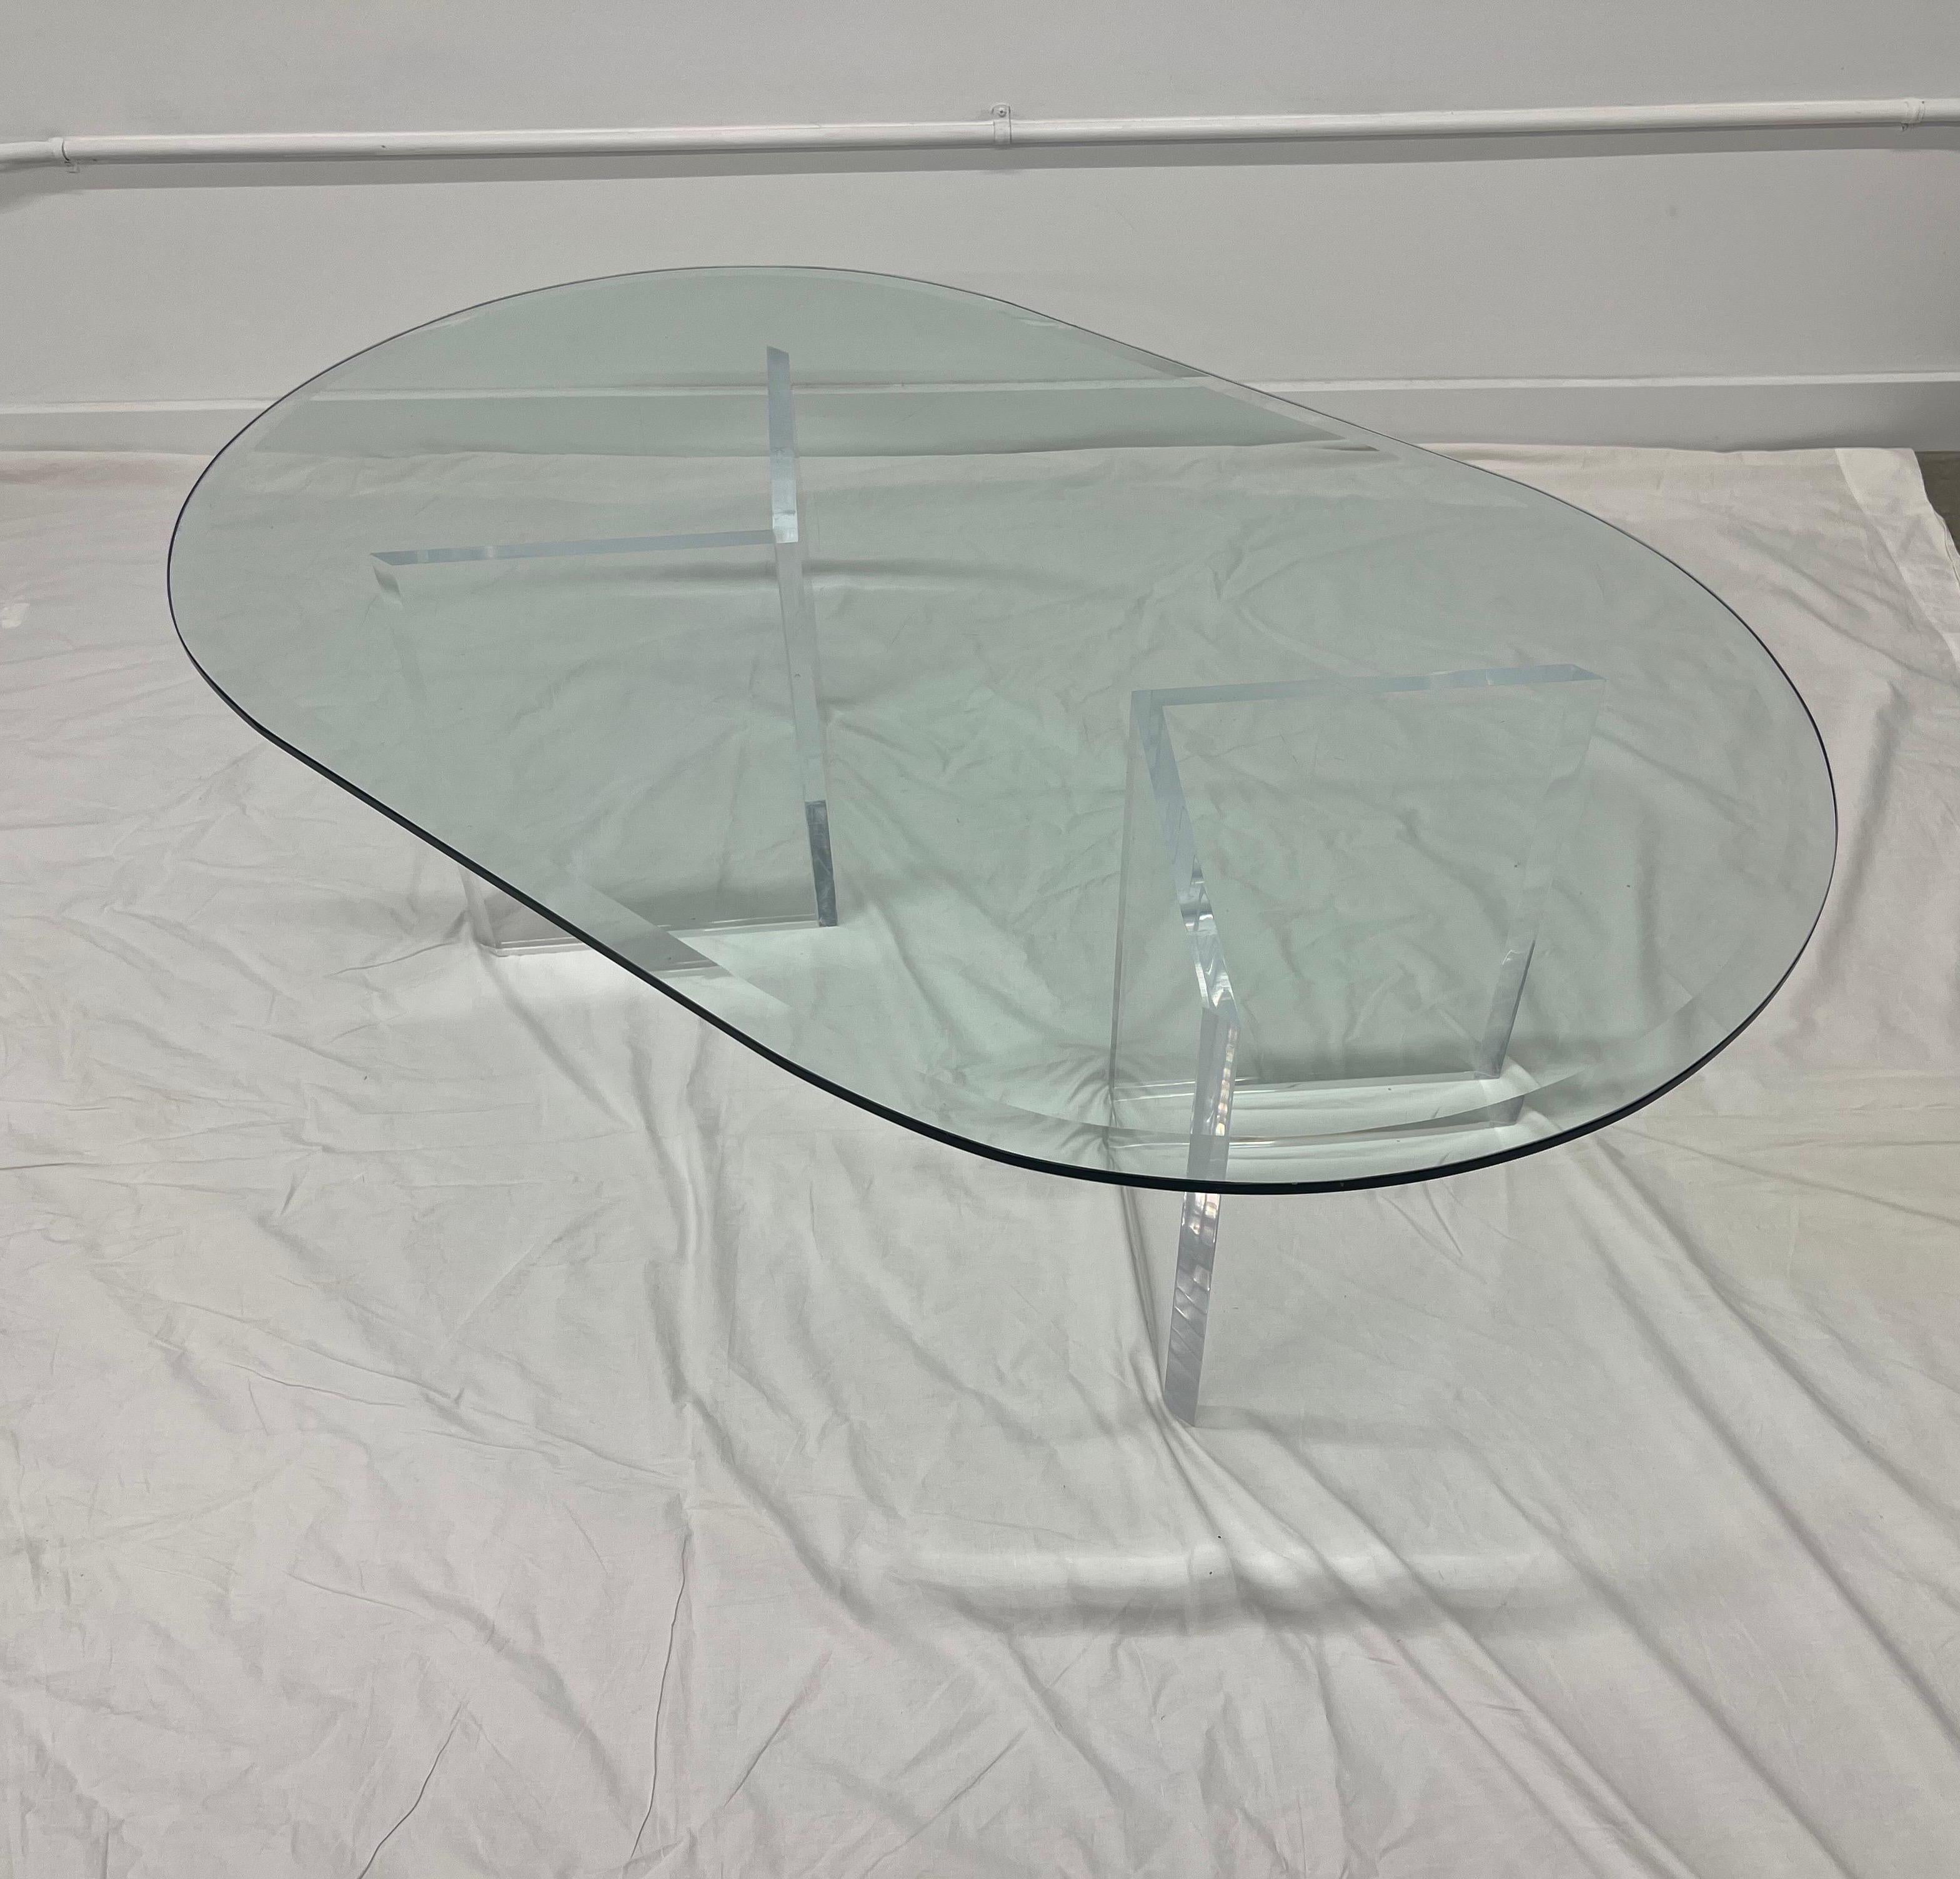 Unique vintage coffee table with two lucite / acrylic “V shaped” bases. A beveled, oval, glass top rests on top. It’s light and airy and you could easily display items within the acrylic.